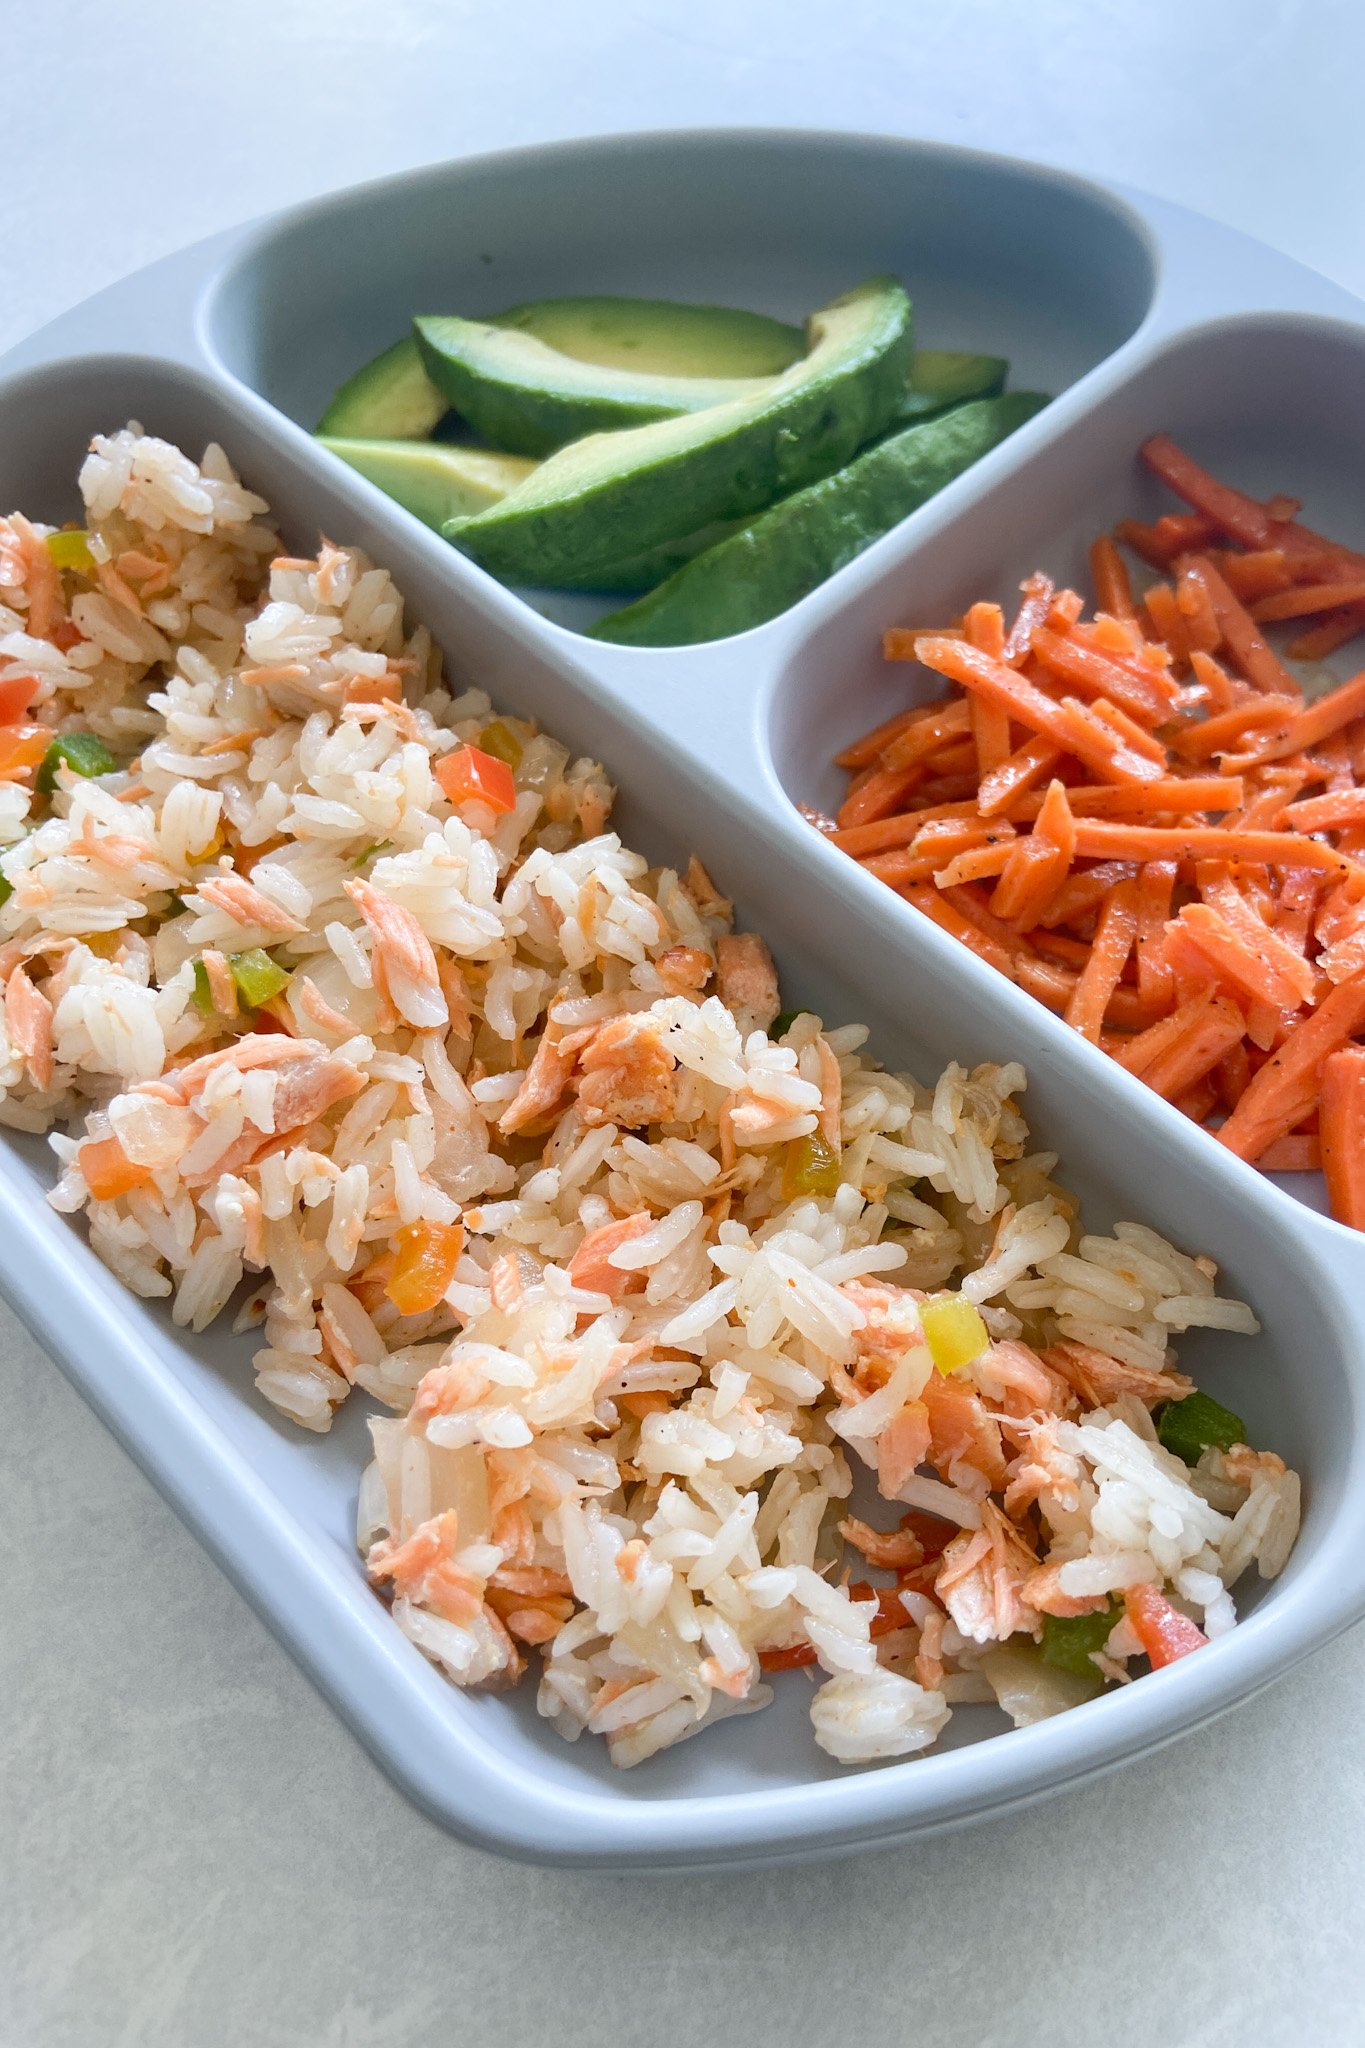 Salmon rice served with avocado and carrots.